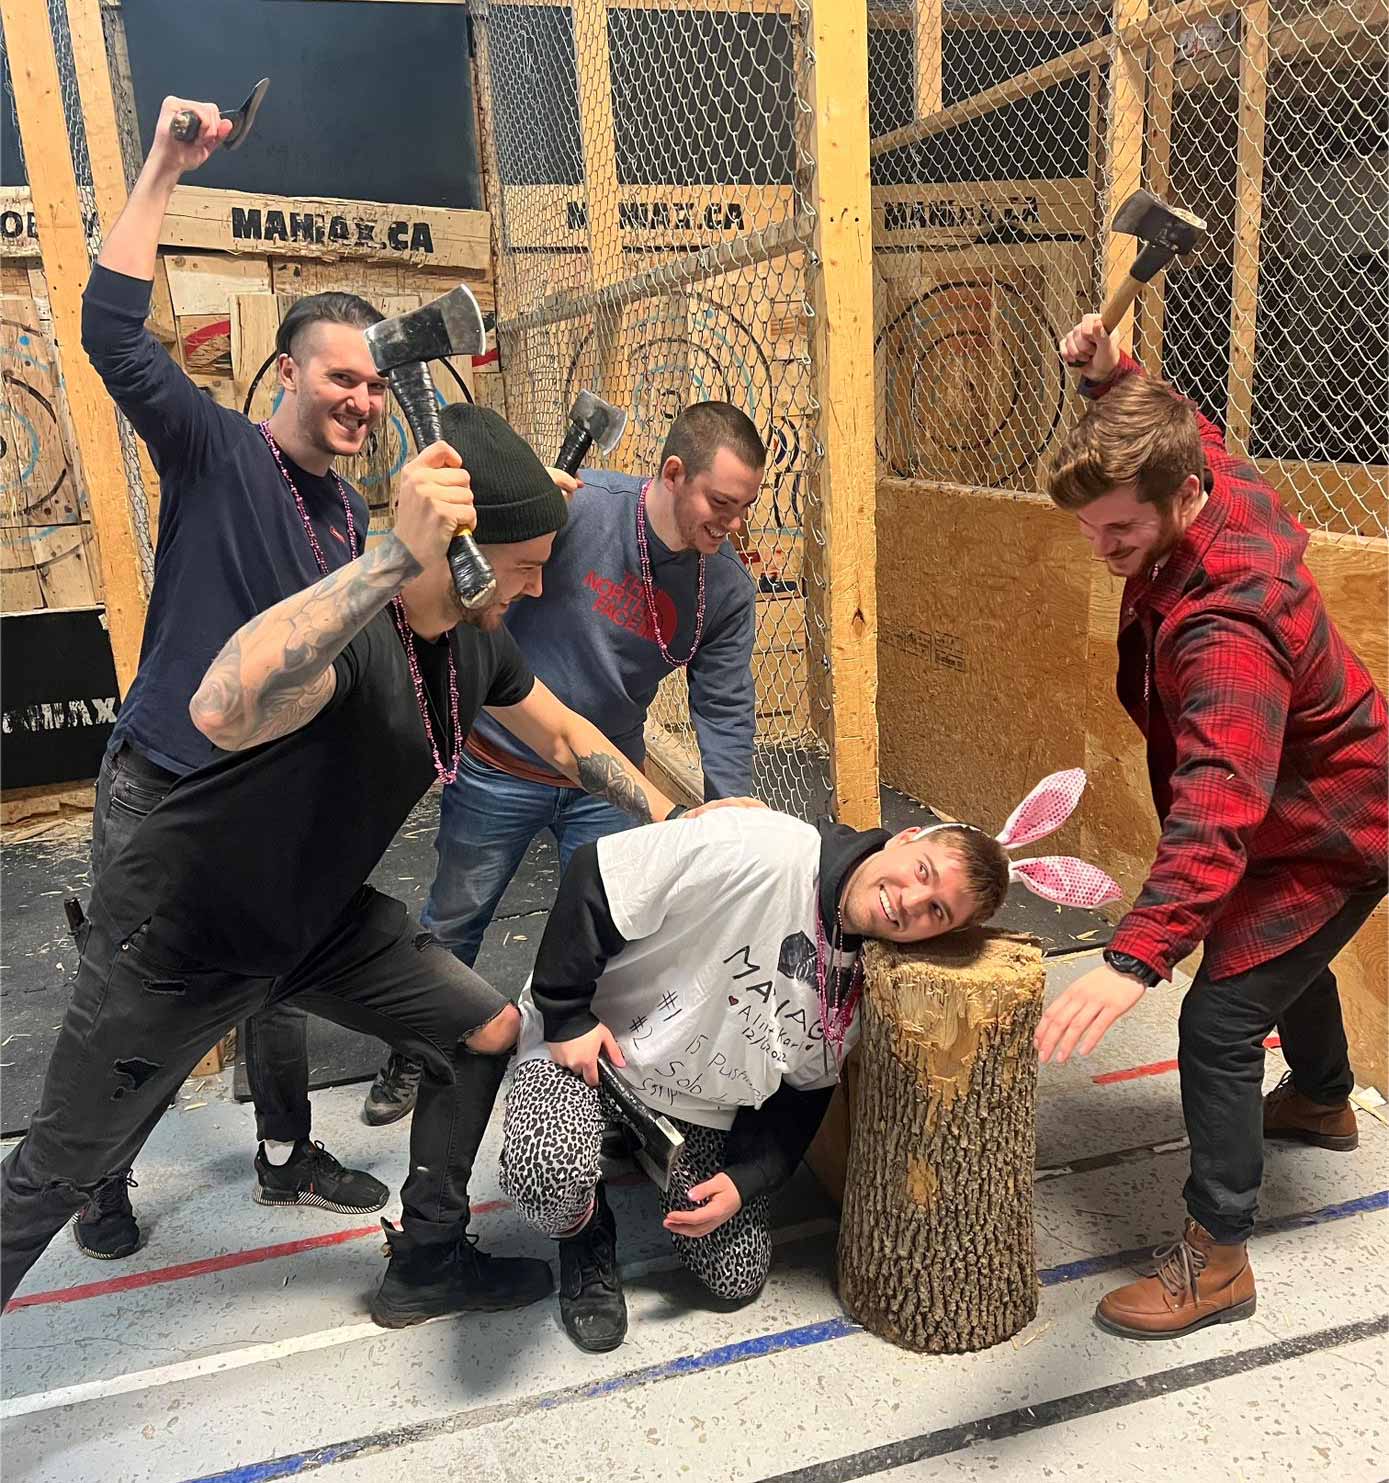 Maniax Laval / Axe Throwing / Bachelor Party